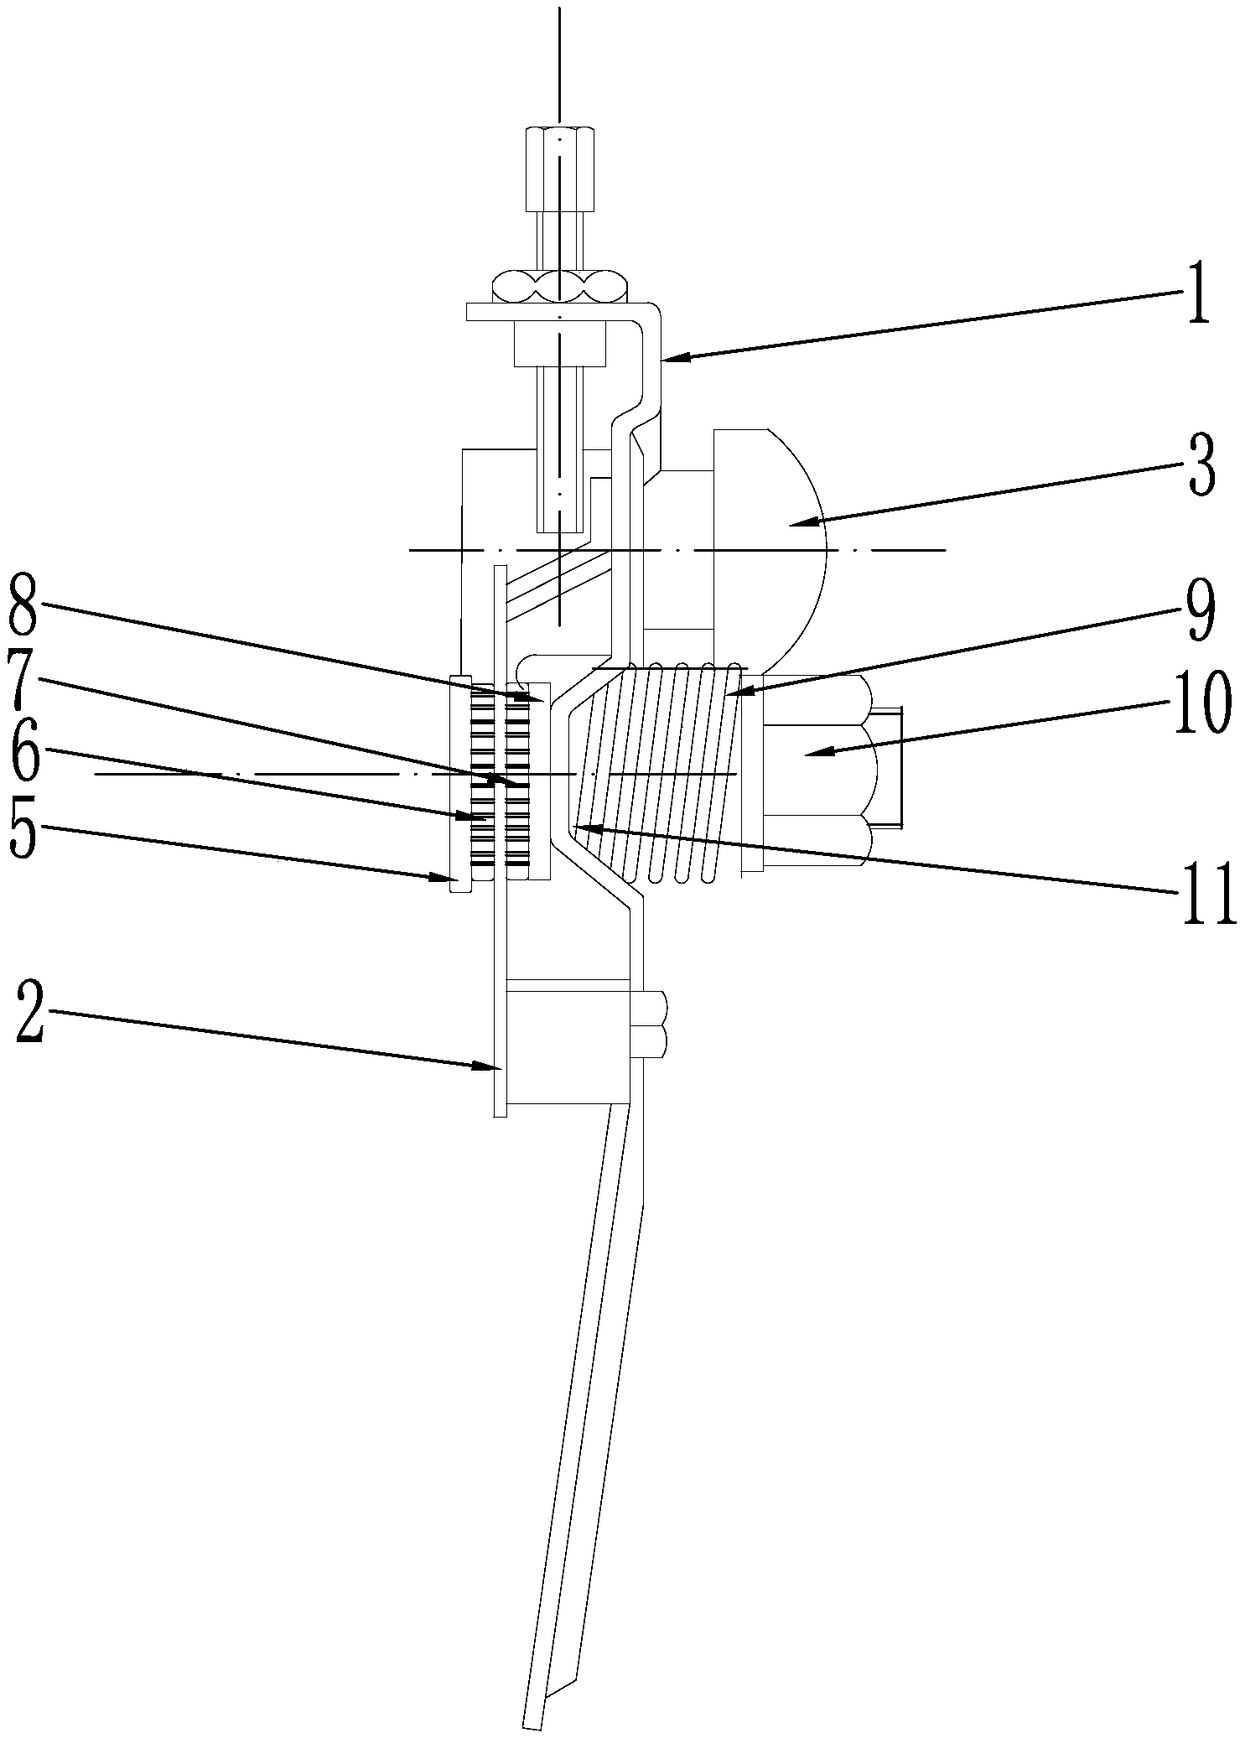 Mechanical speed regulating actuator for single-cylinder air-cooled diesel engine